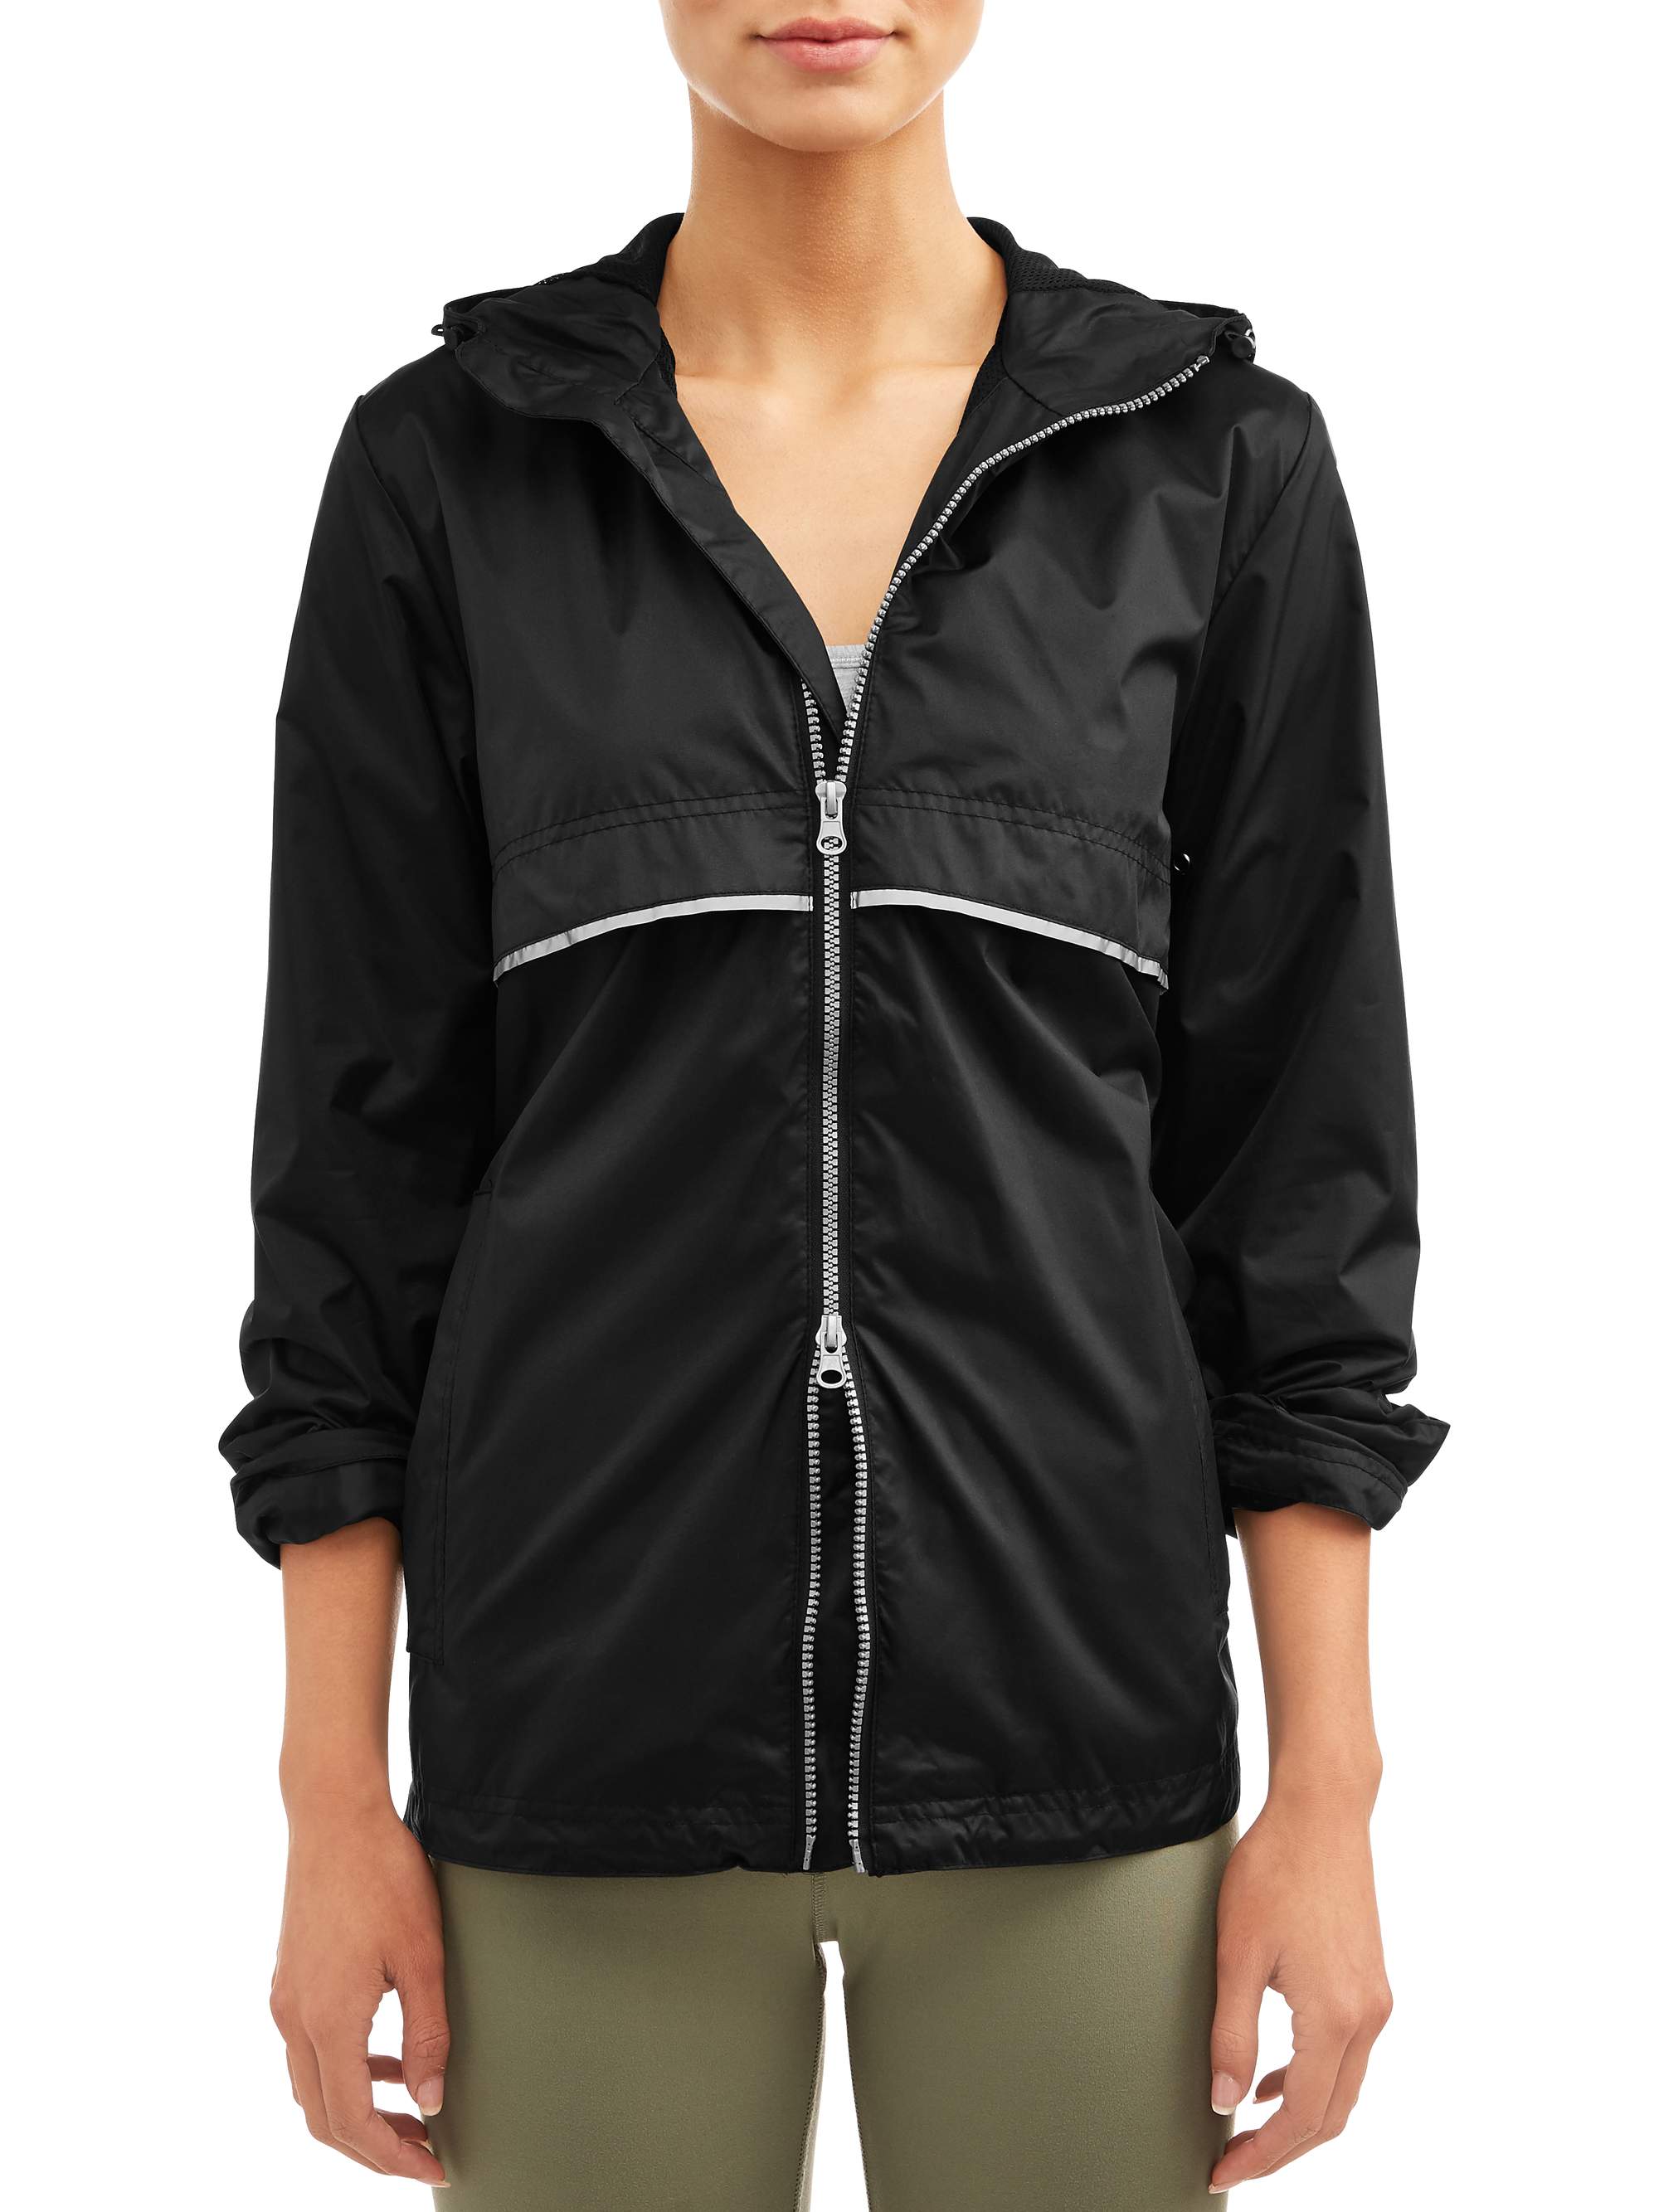 Climate Concepts Women's Hooded Windbreaker Jacket - image 1 of 4